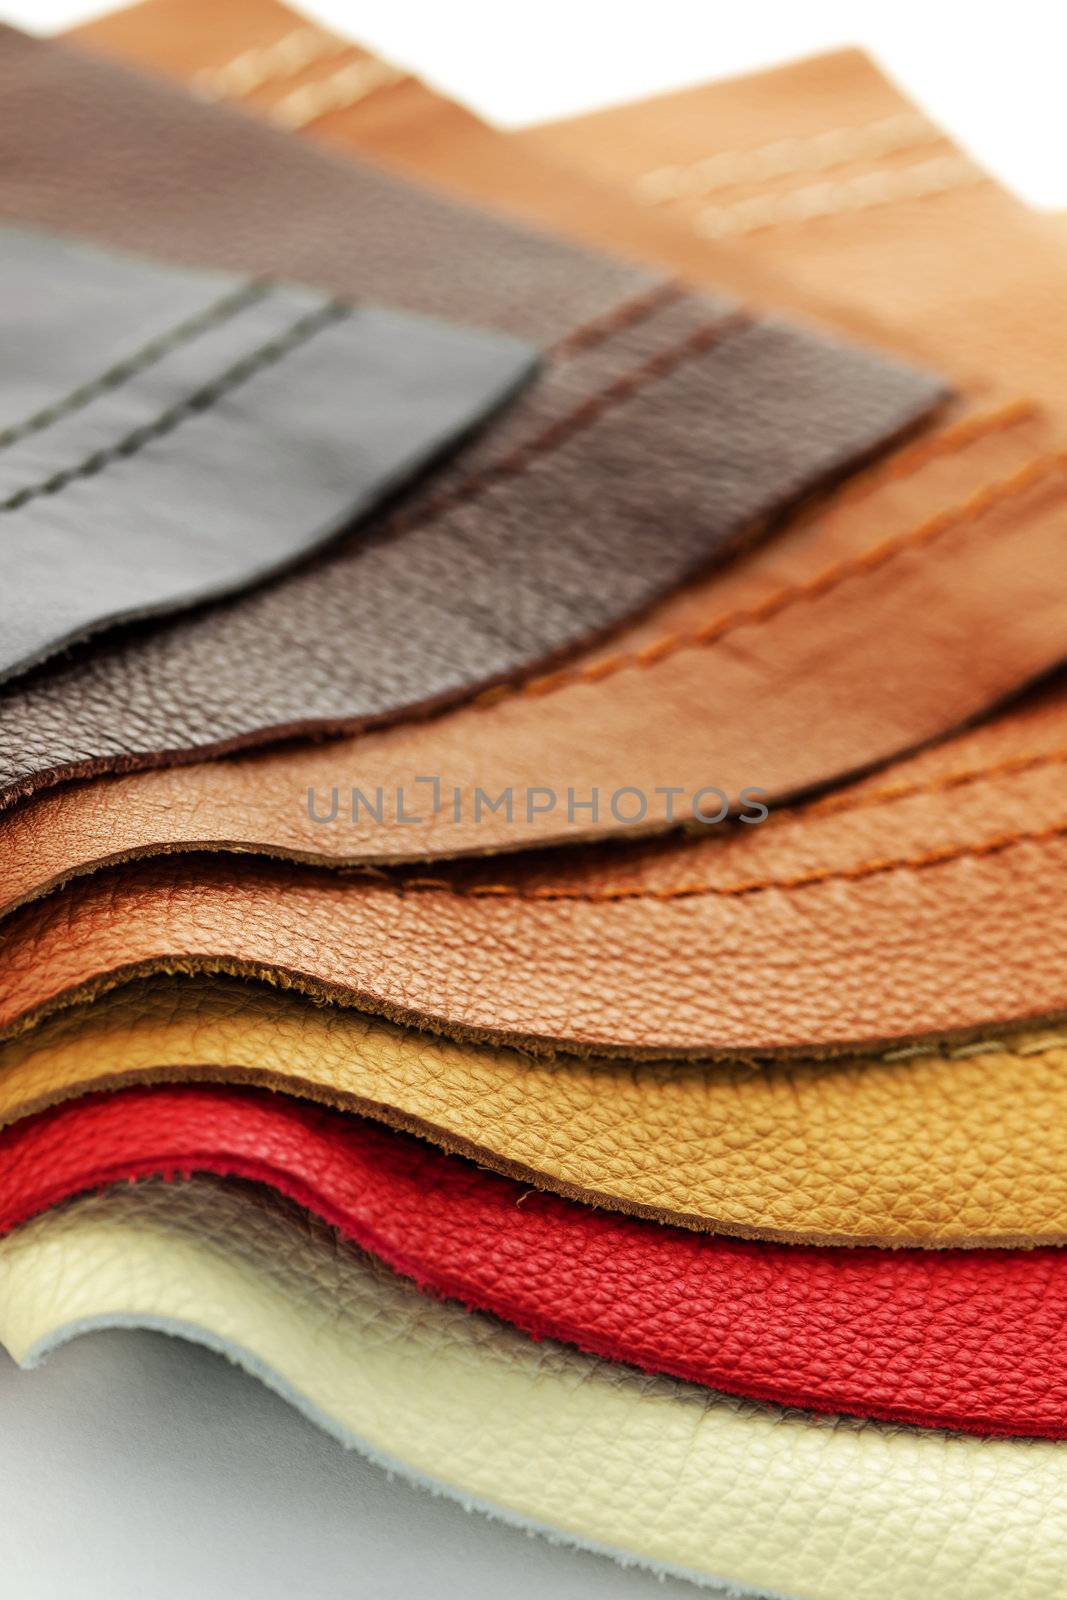 Leather upholstery samples by elenathewise